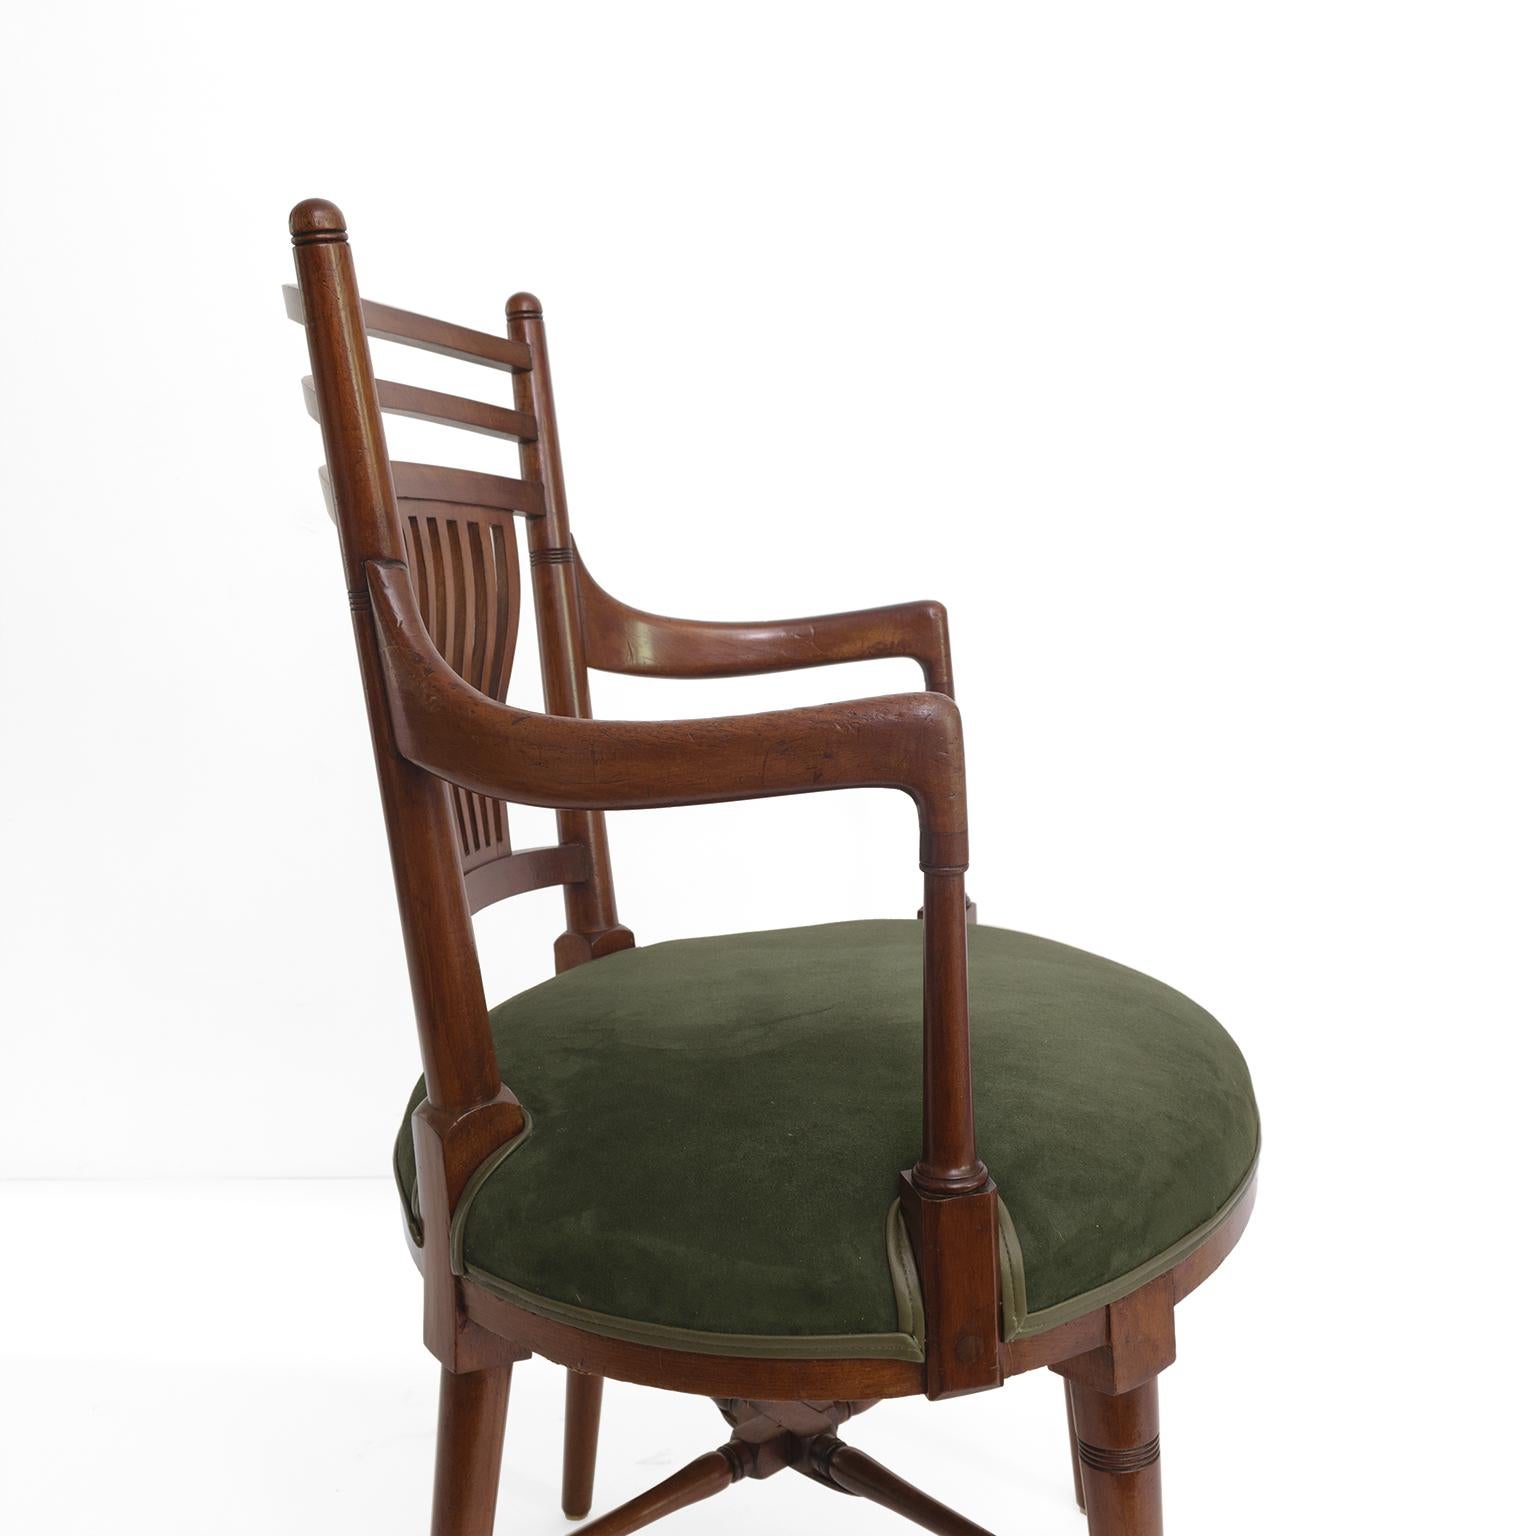 Carved Arts & Crafts Jacobean Armchair '1870-80' Attributed to Edward William Godwin